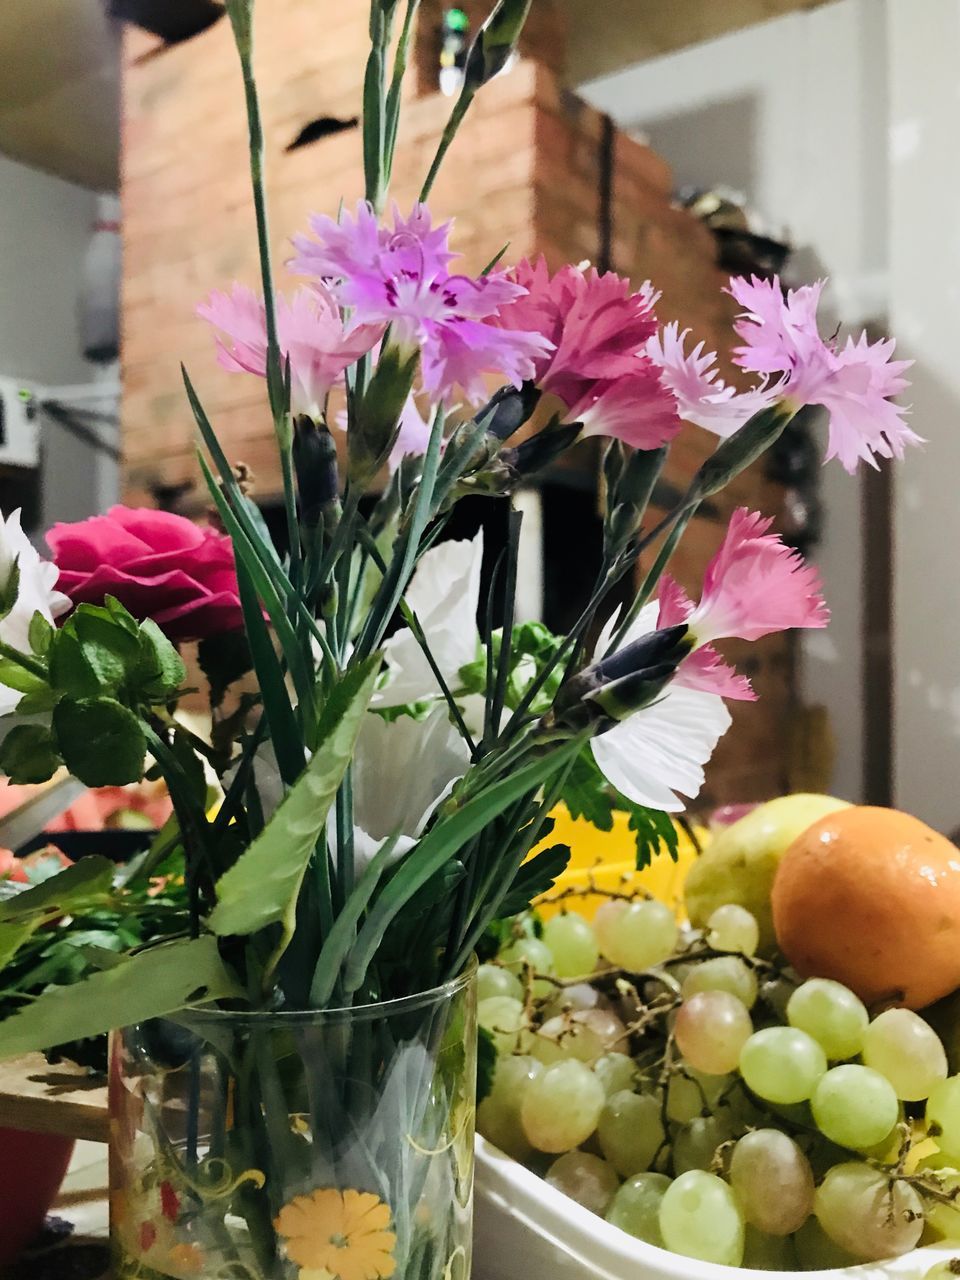 flower, flowering plant, freshness, plant, vase, fragility, vulnerability, beauty in nature, indoors, close-up, nature, no people, food, glass - material, variation, arrangement, fruit, food and drink, flower head, healthy eating, flower arrangement, glass, purple, bouquet